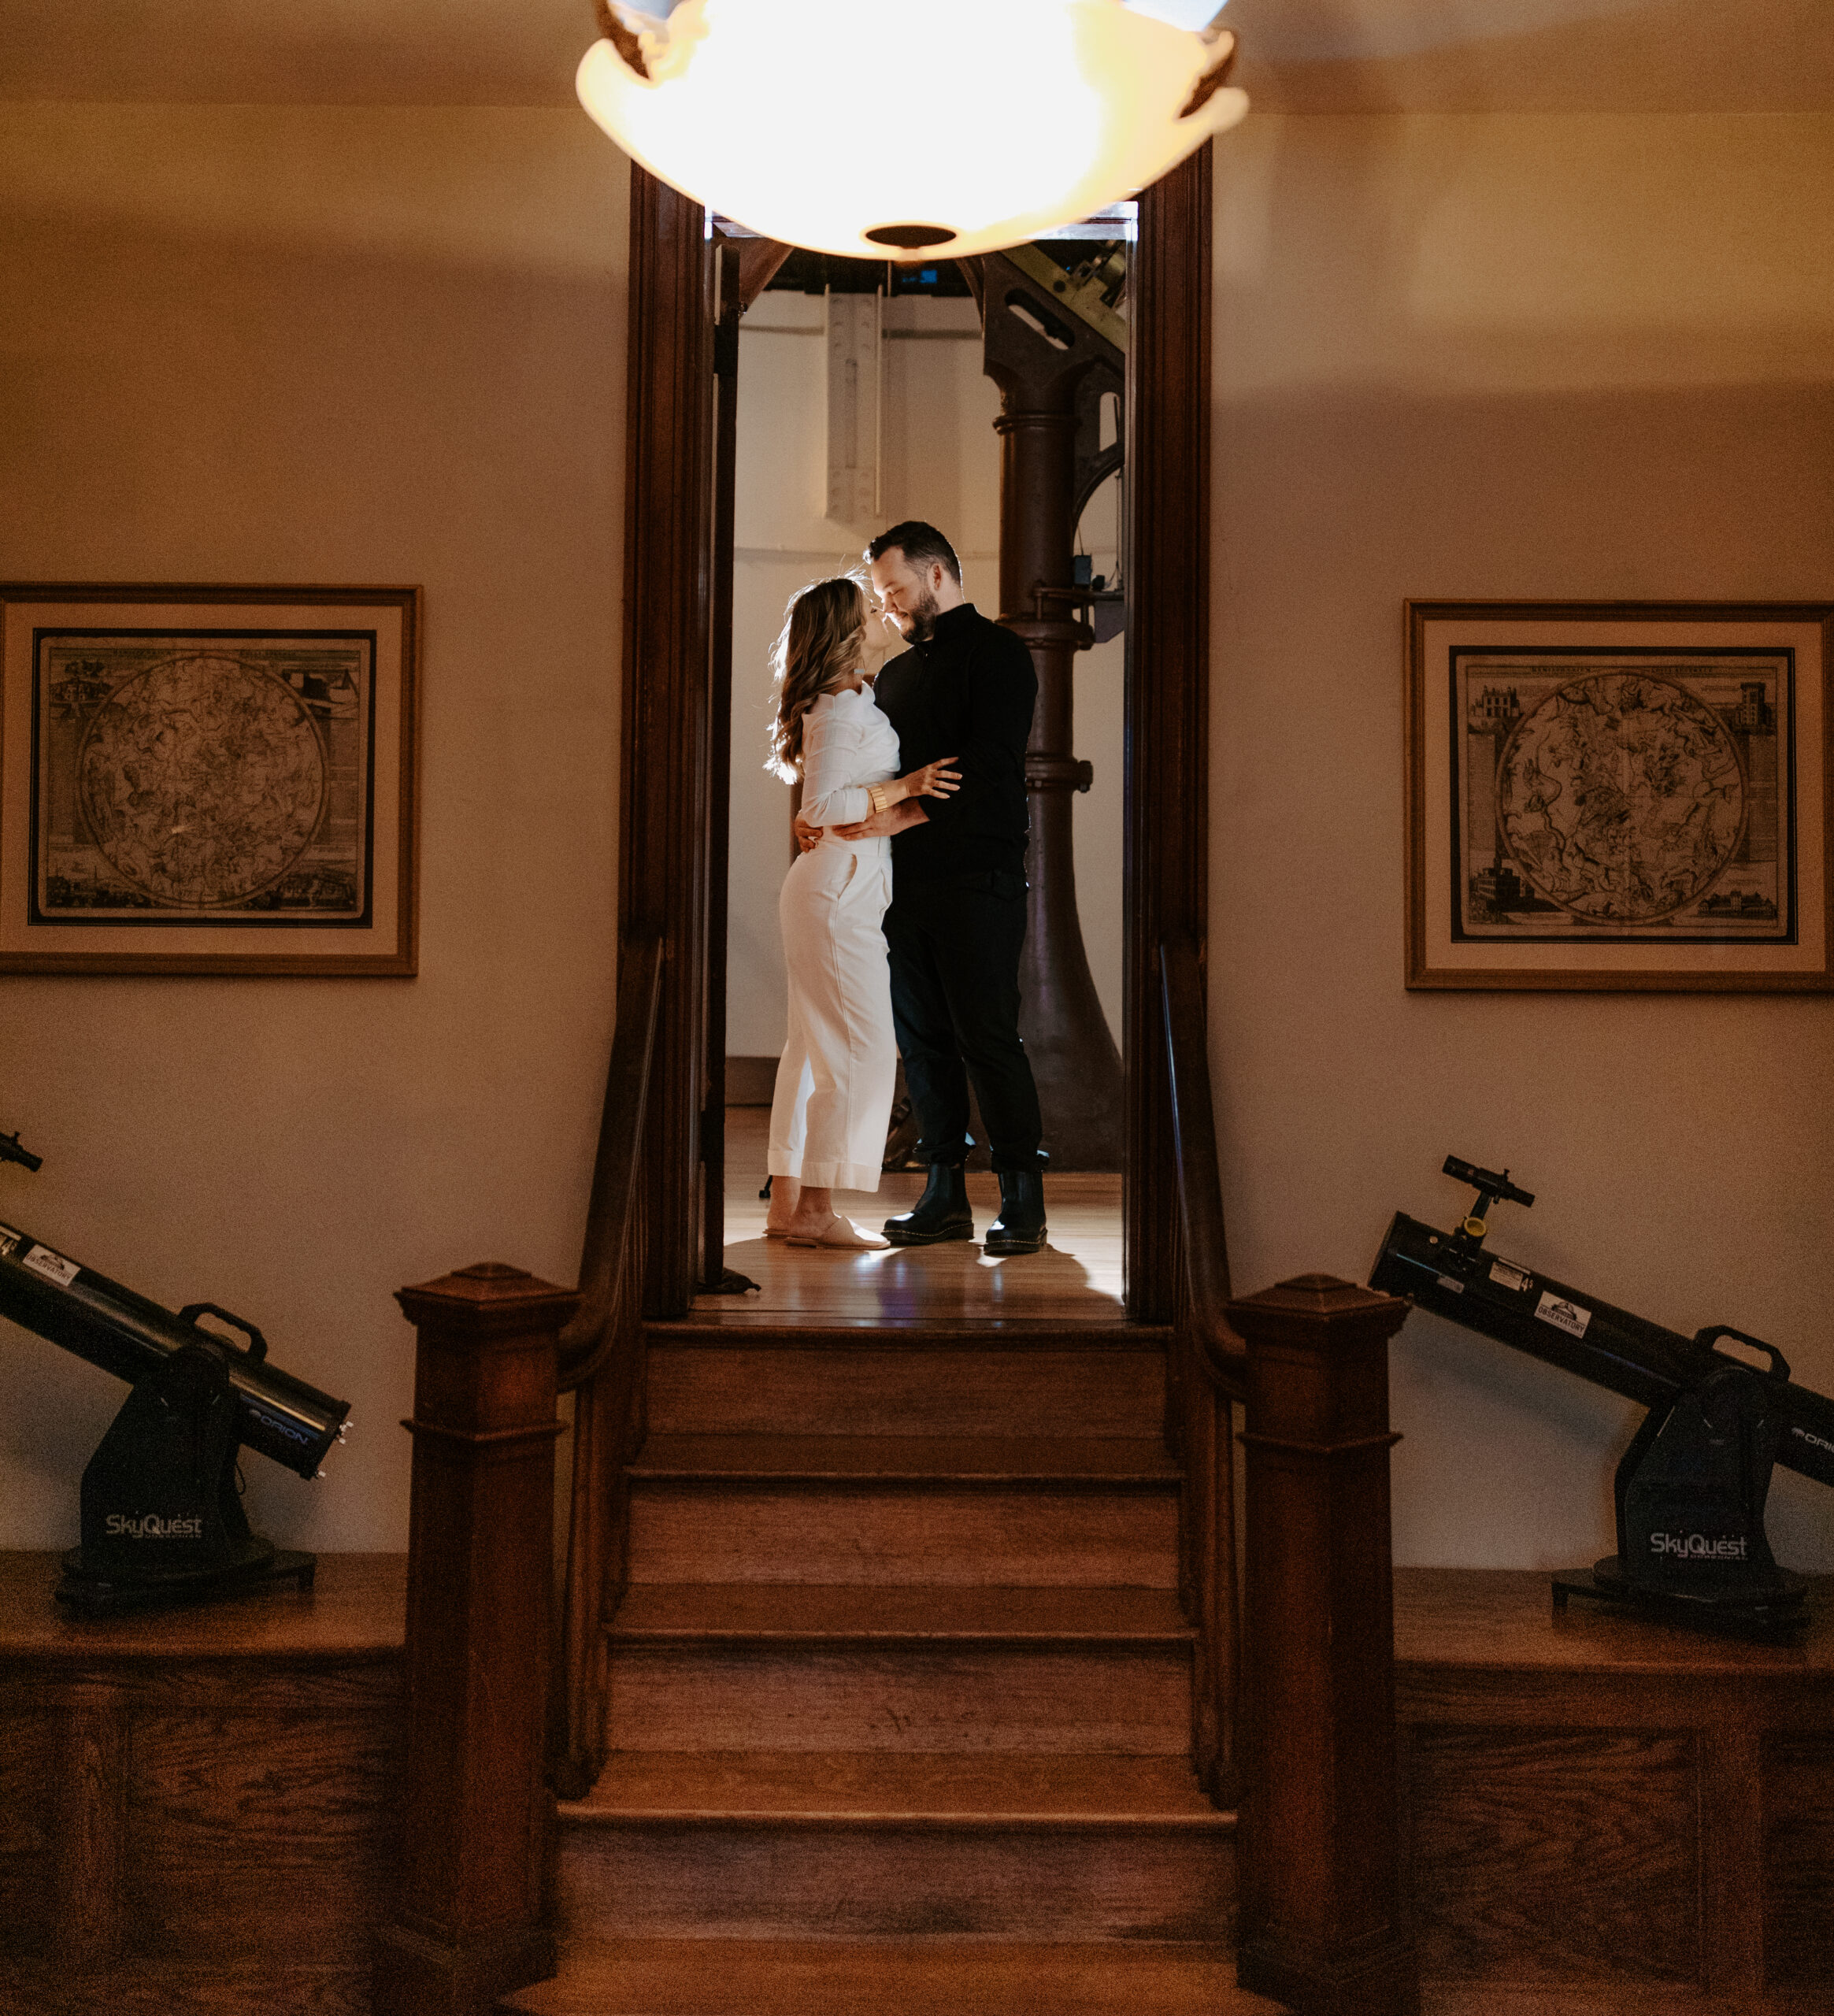 An engaged couple's night time portraits at the Cincinnati Observatory